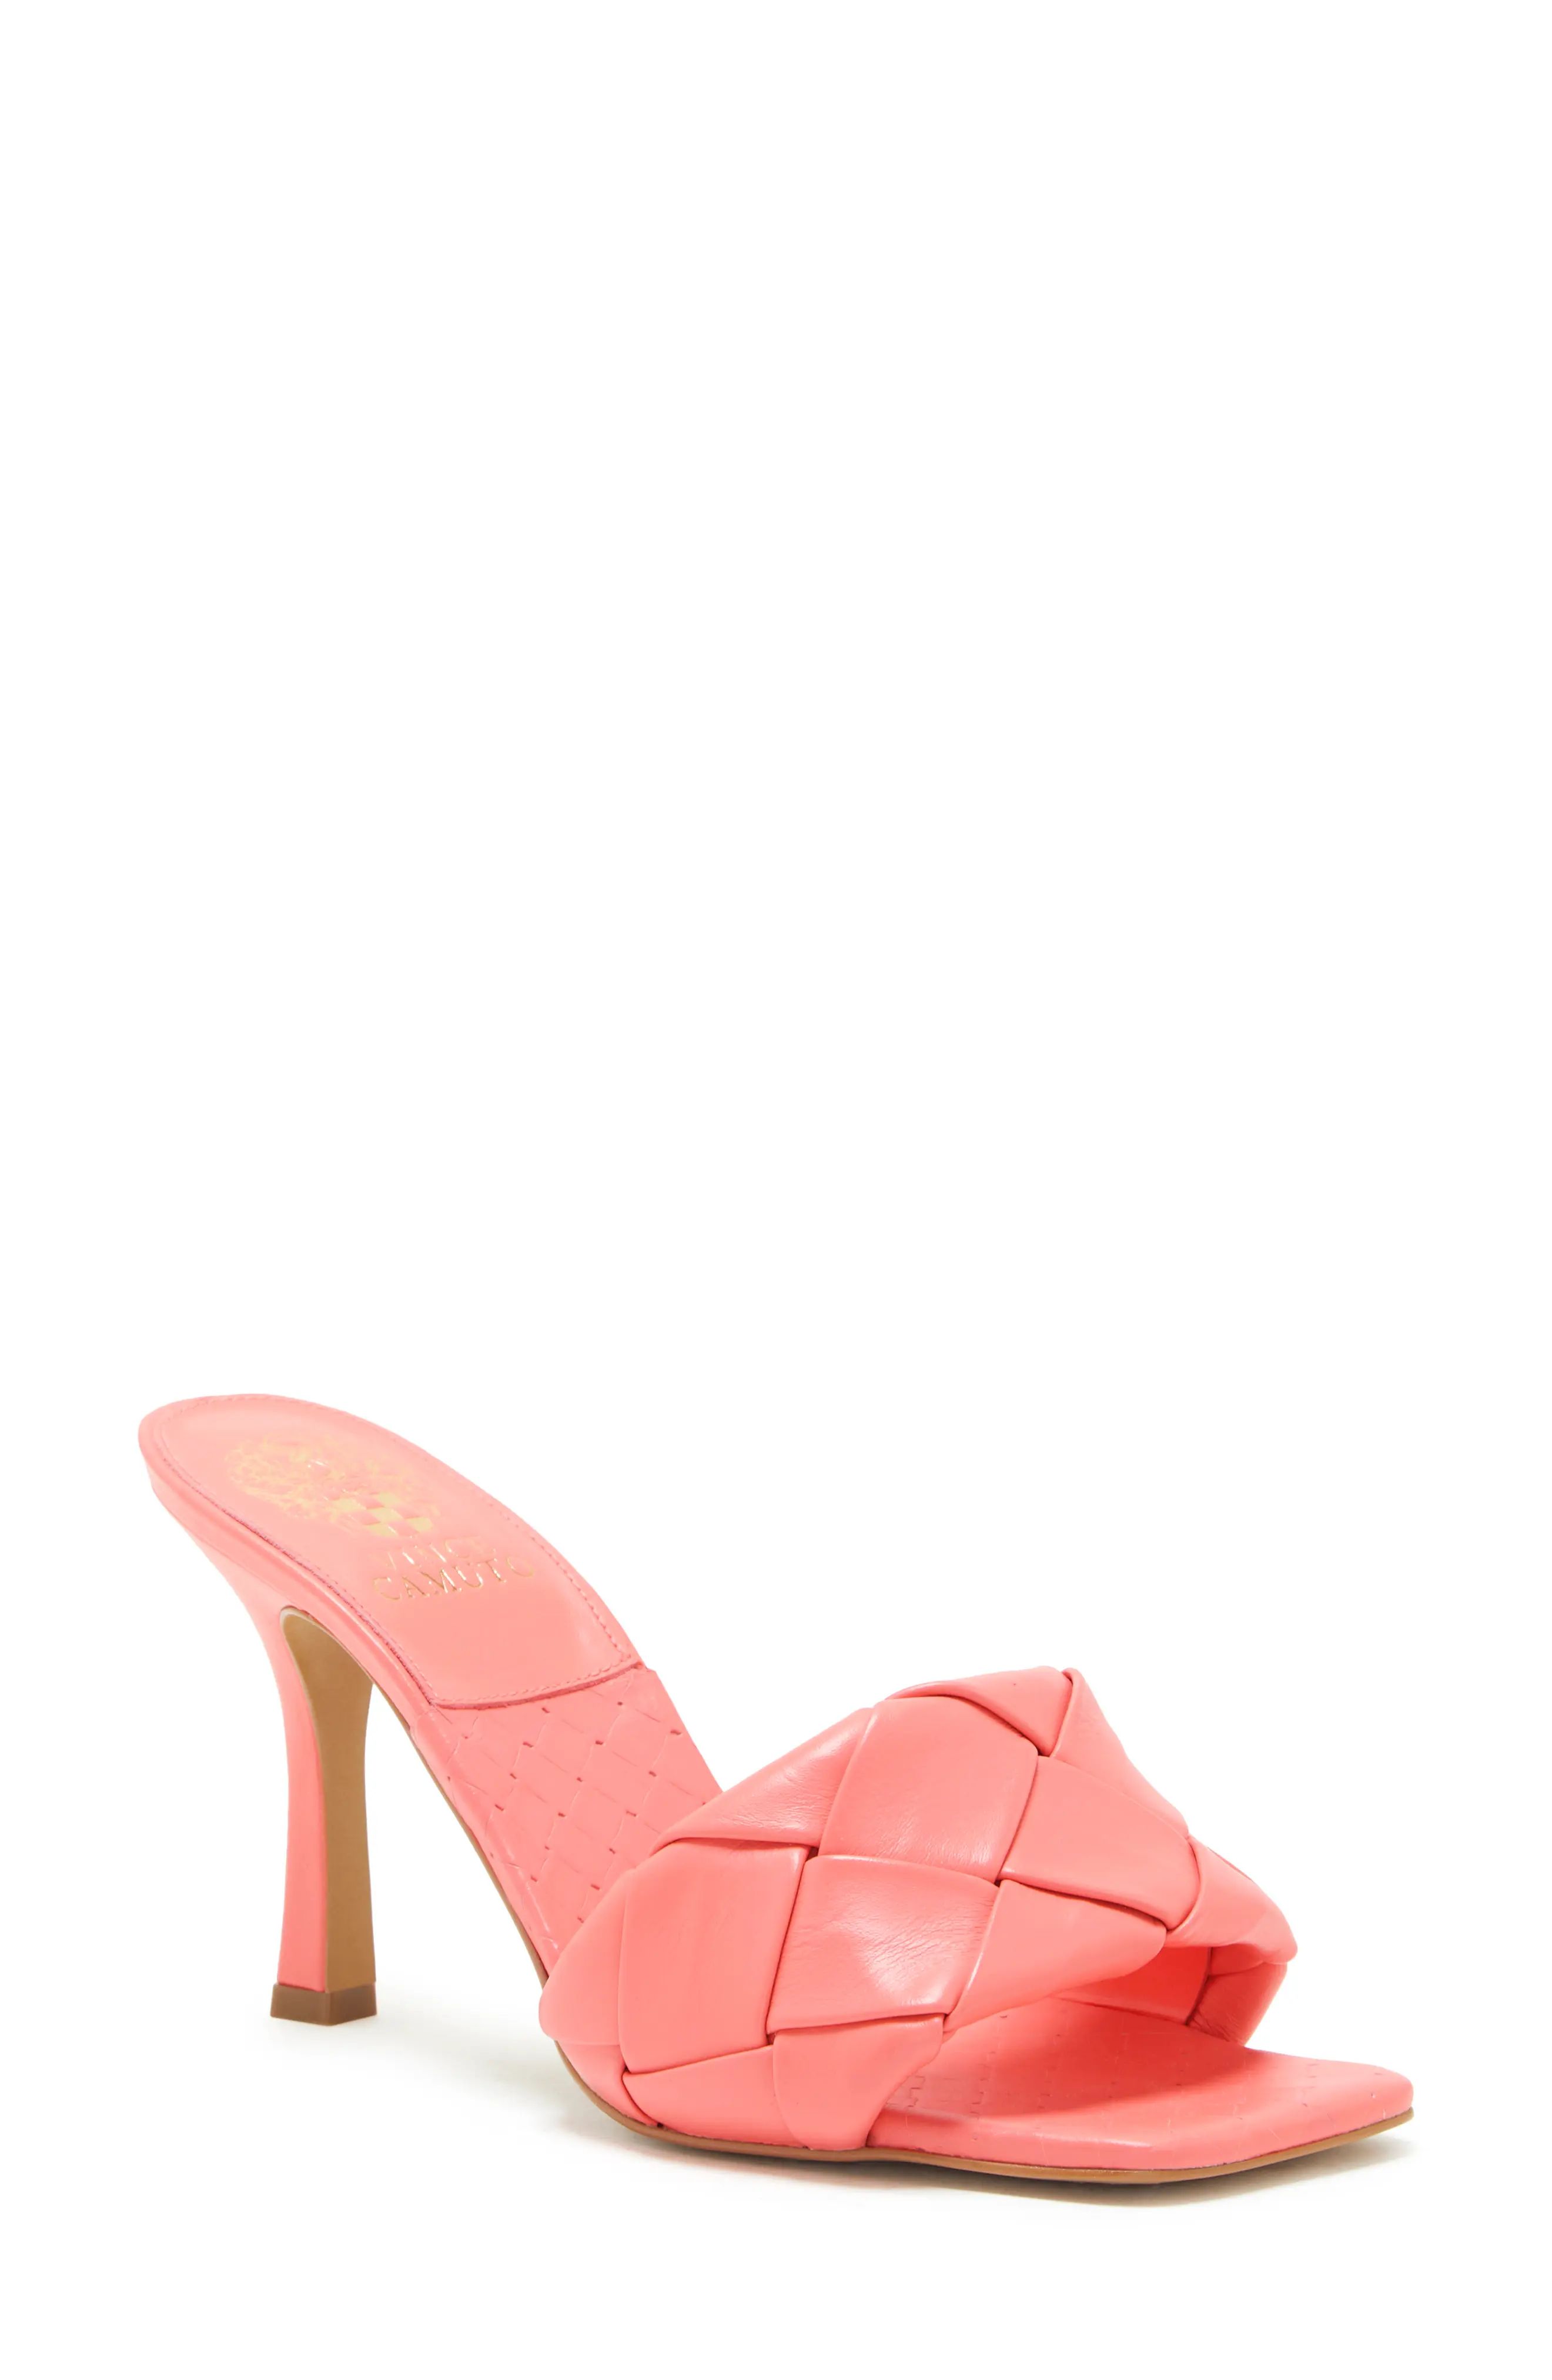 Vince Camuto Brelanie Braided Strap Sandal in Ultra Coral at Nordstrom, Size 7.5 | Nordstrom